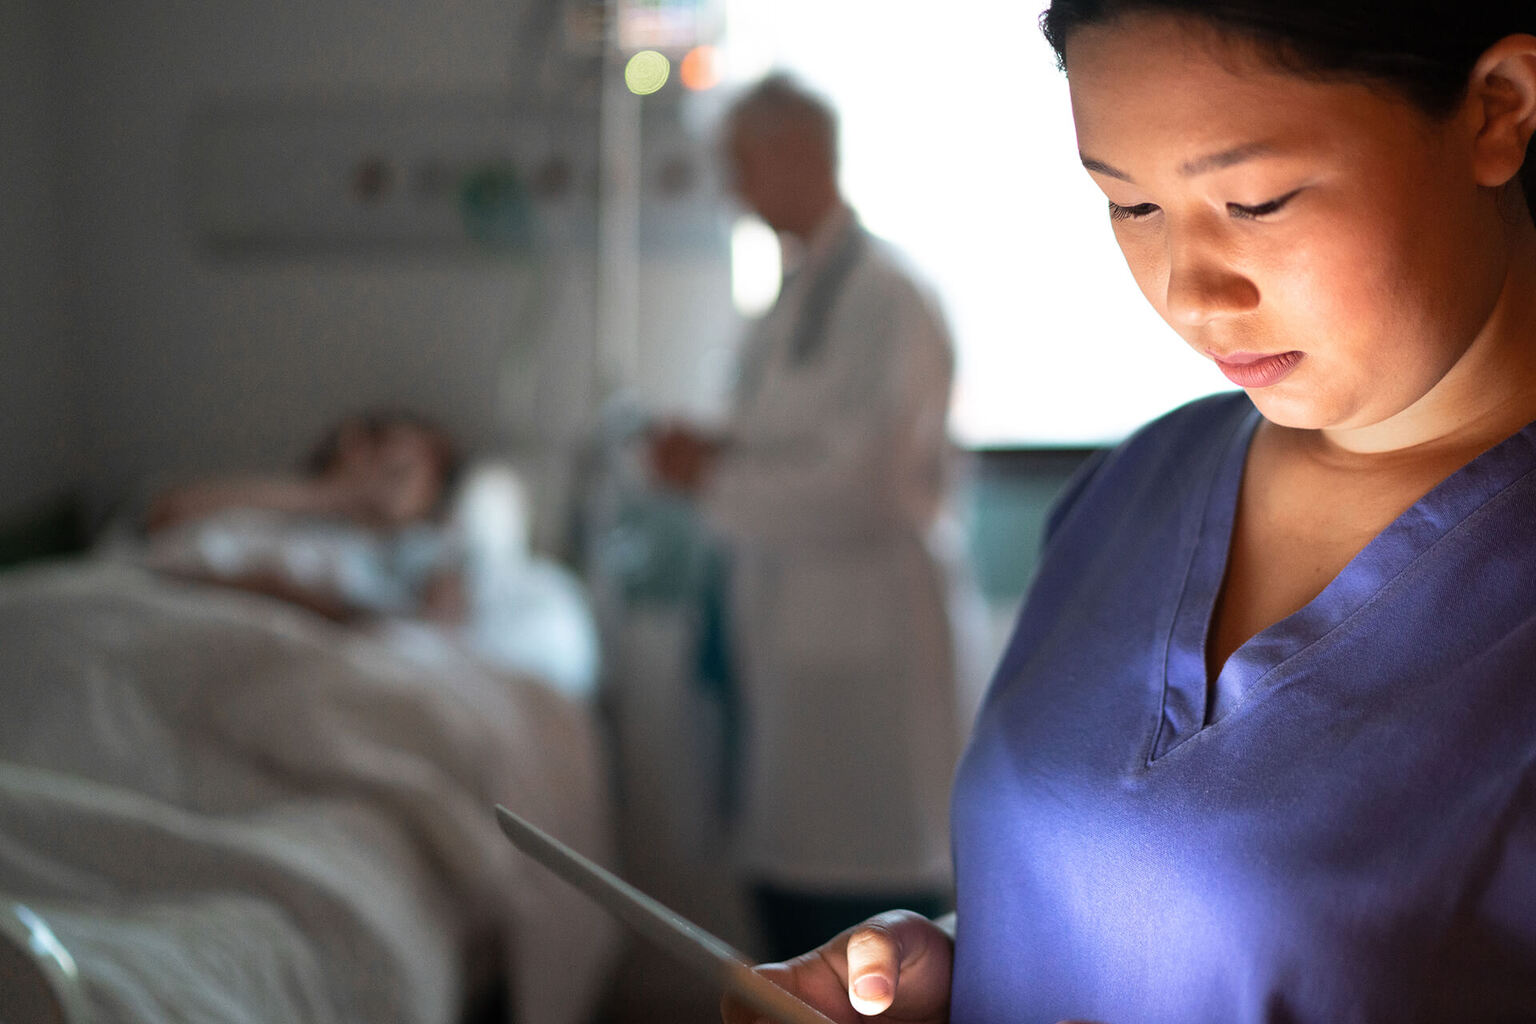 In dark hospital room, nurse reviews patient info on digital chart while doctor is at patient bedside in the background